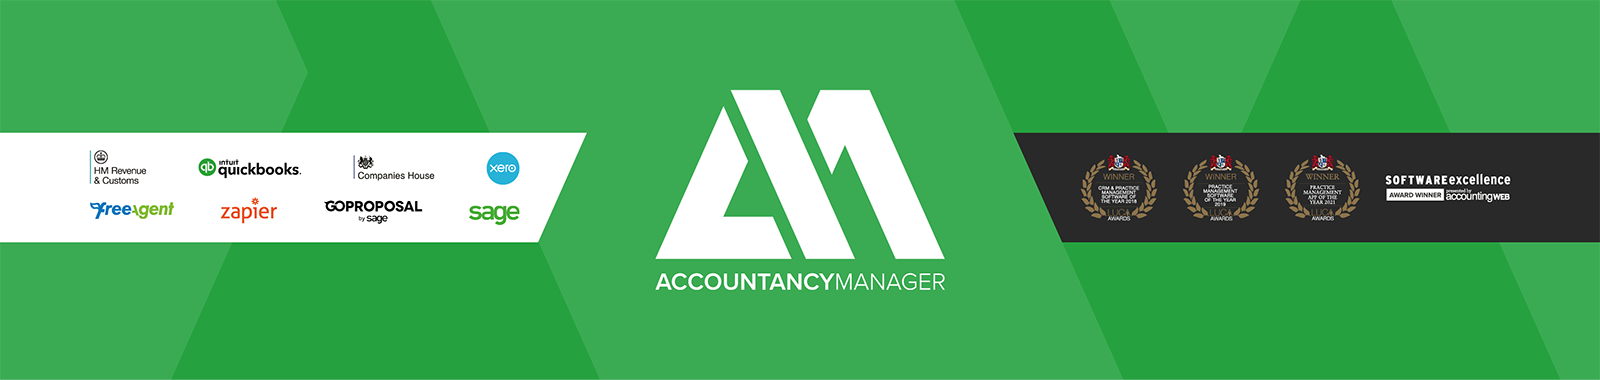 Accountancy Manager Web Banner Header